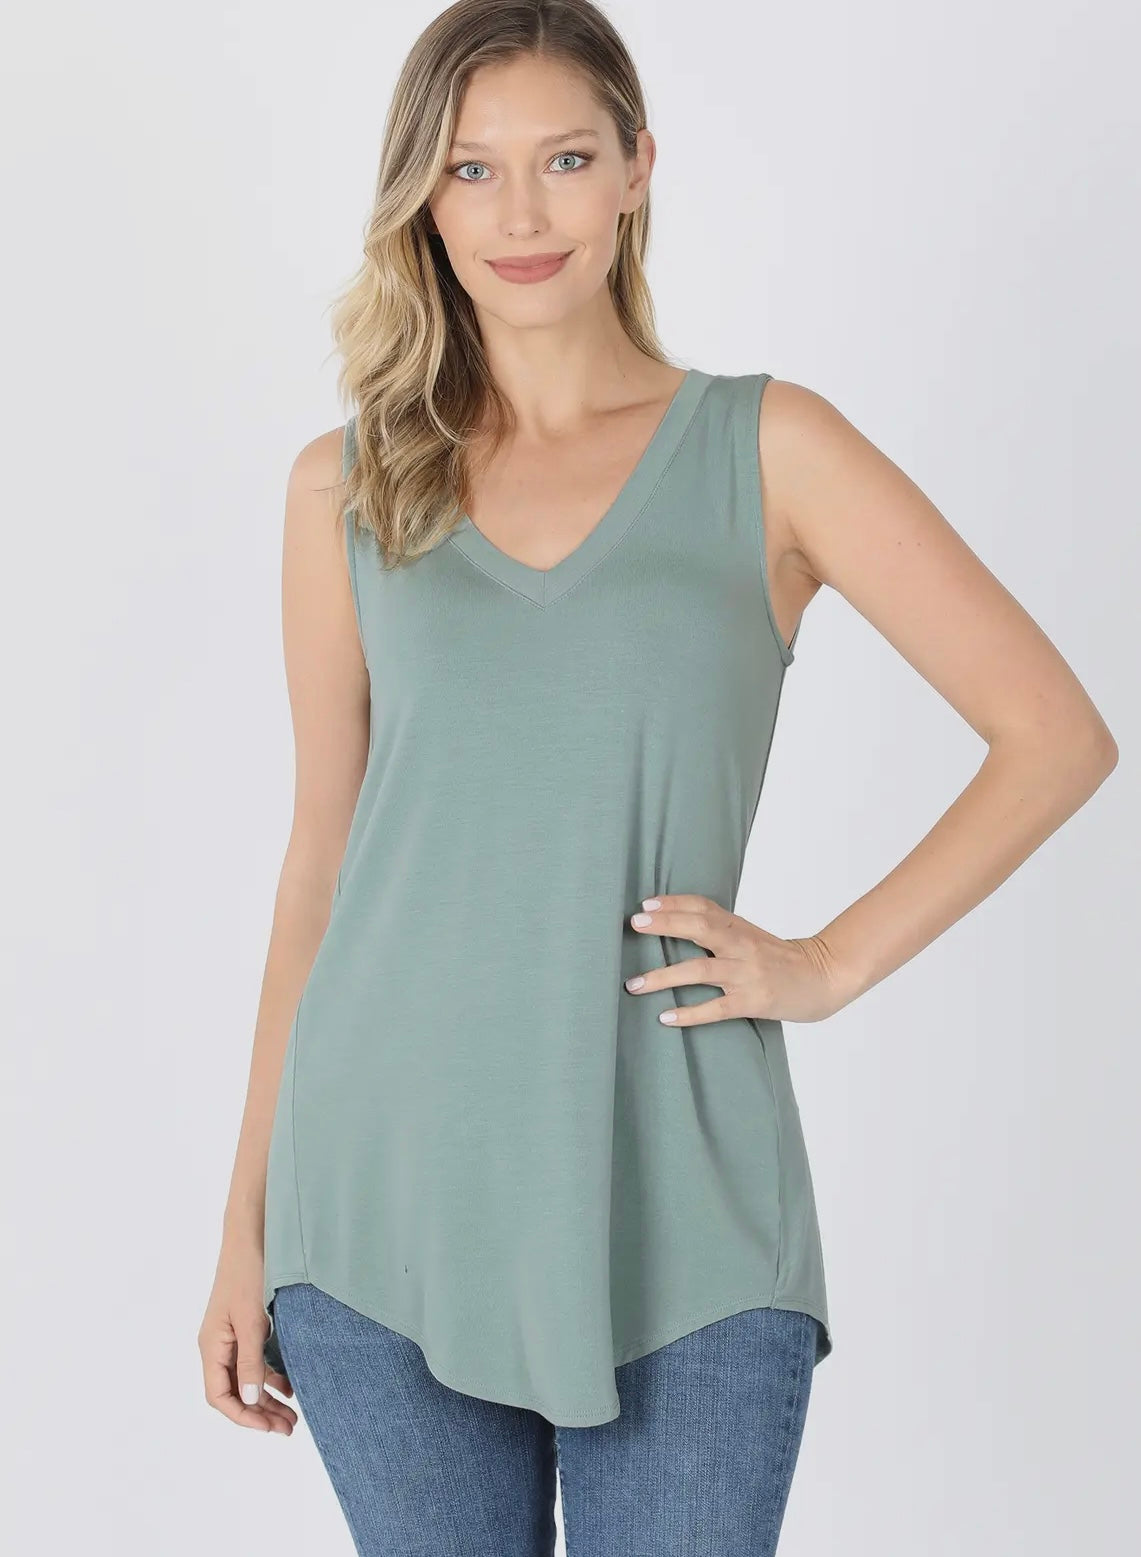 Doorbuster Alert! Luxe Rayon V-Neck Tank - 4 Color Options!